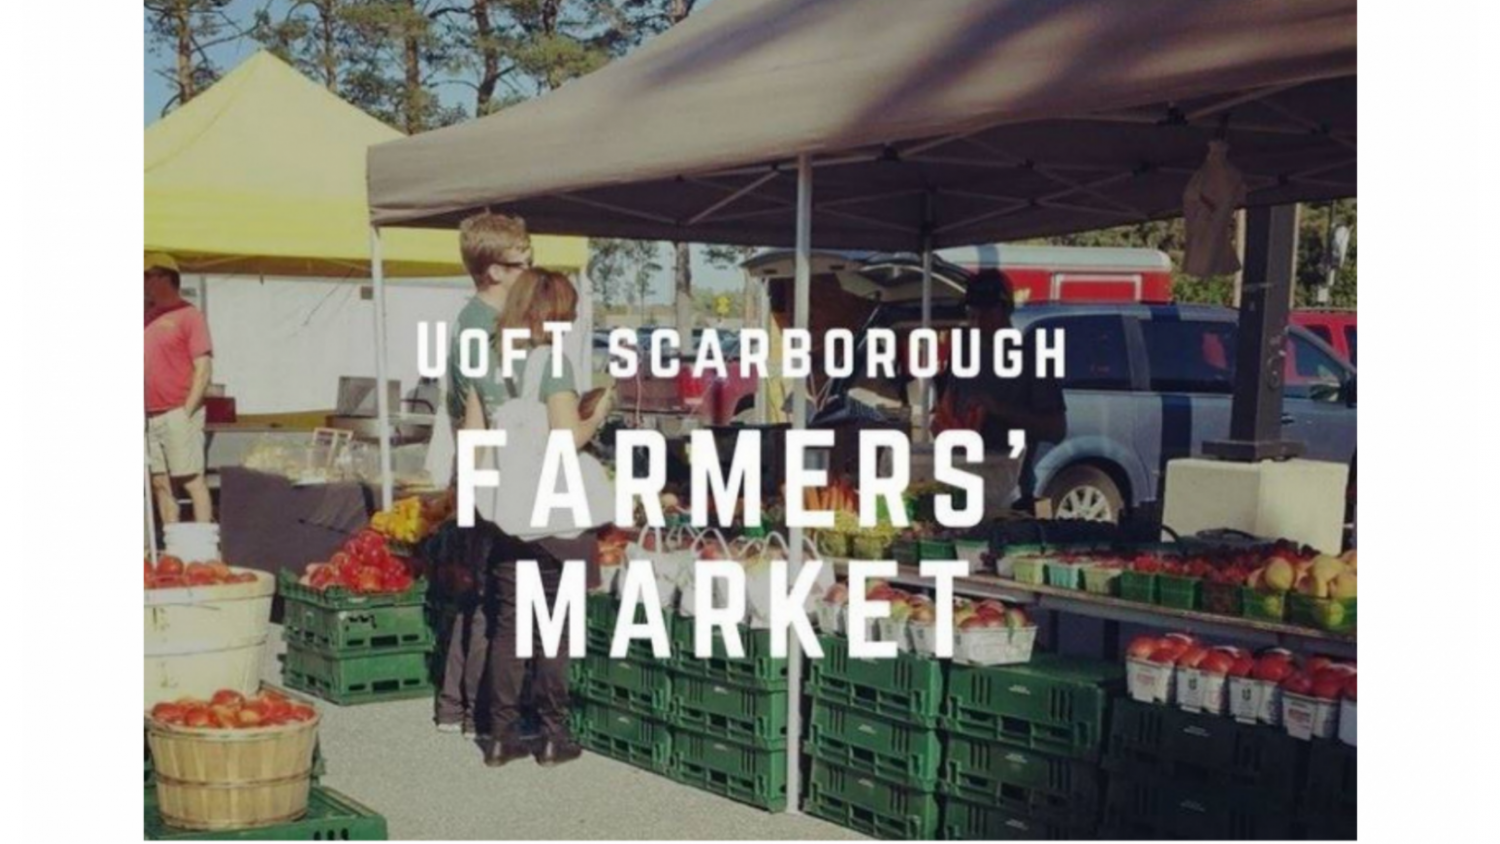 The Farmer’s Market brings local farmers, producers and artisans to campus, connecting them with customers on campus and in the community.